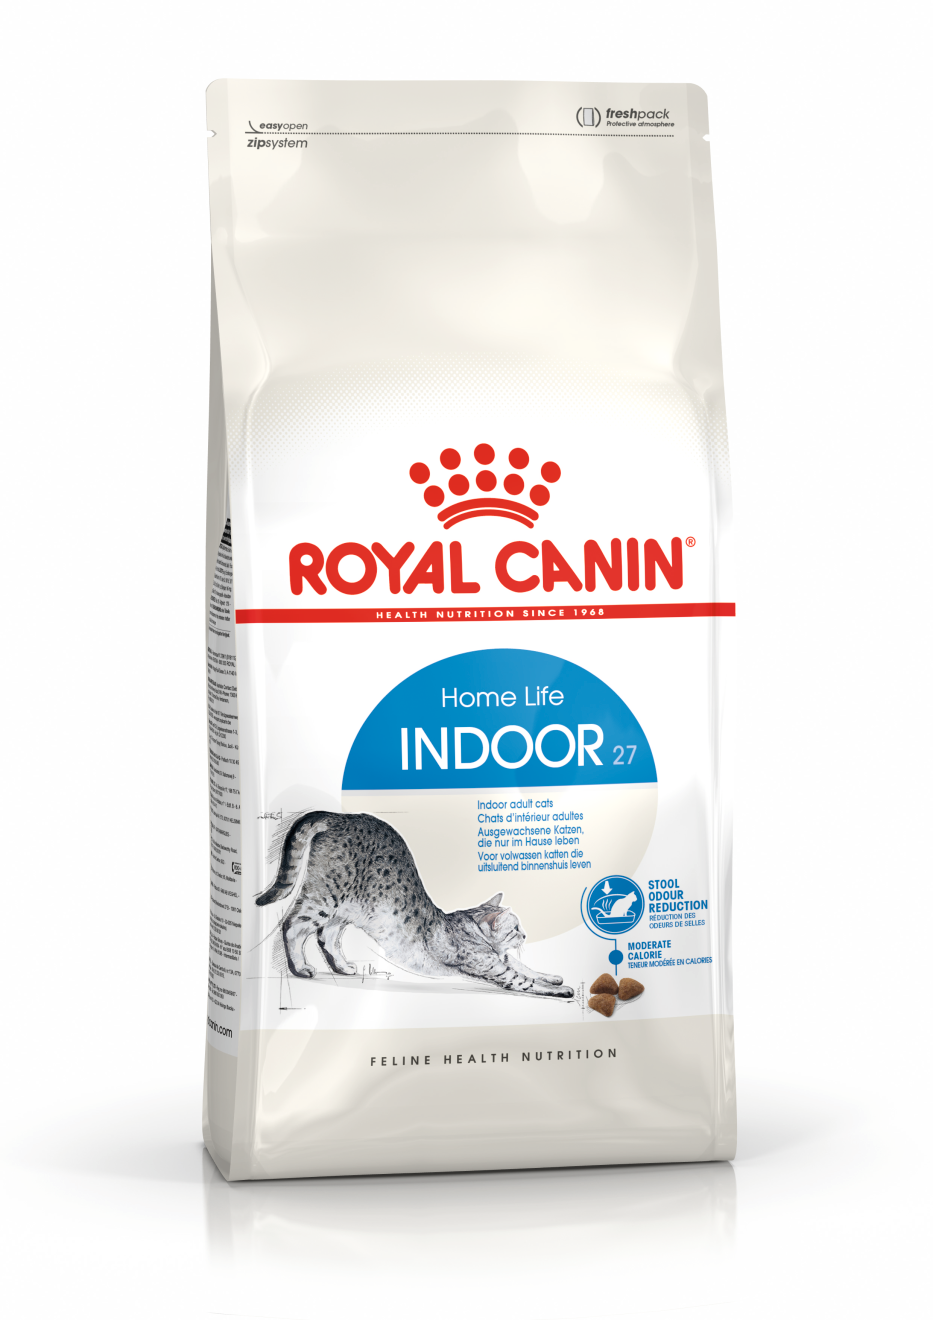 royal canin cat outdoor